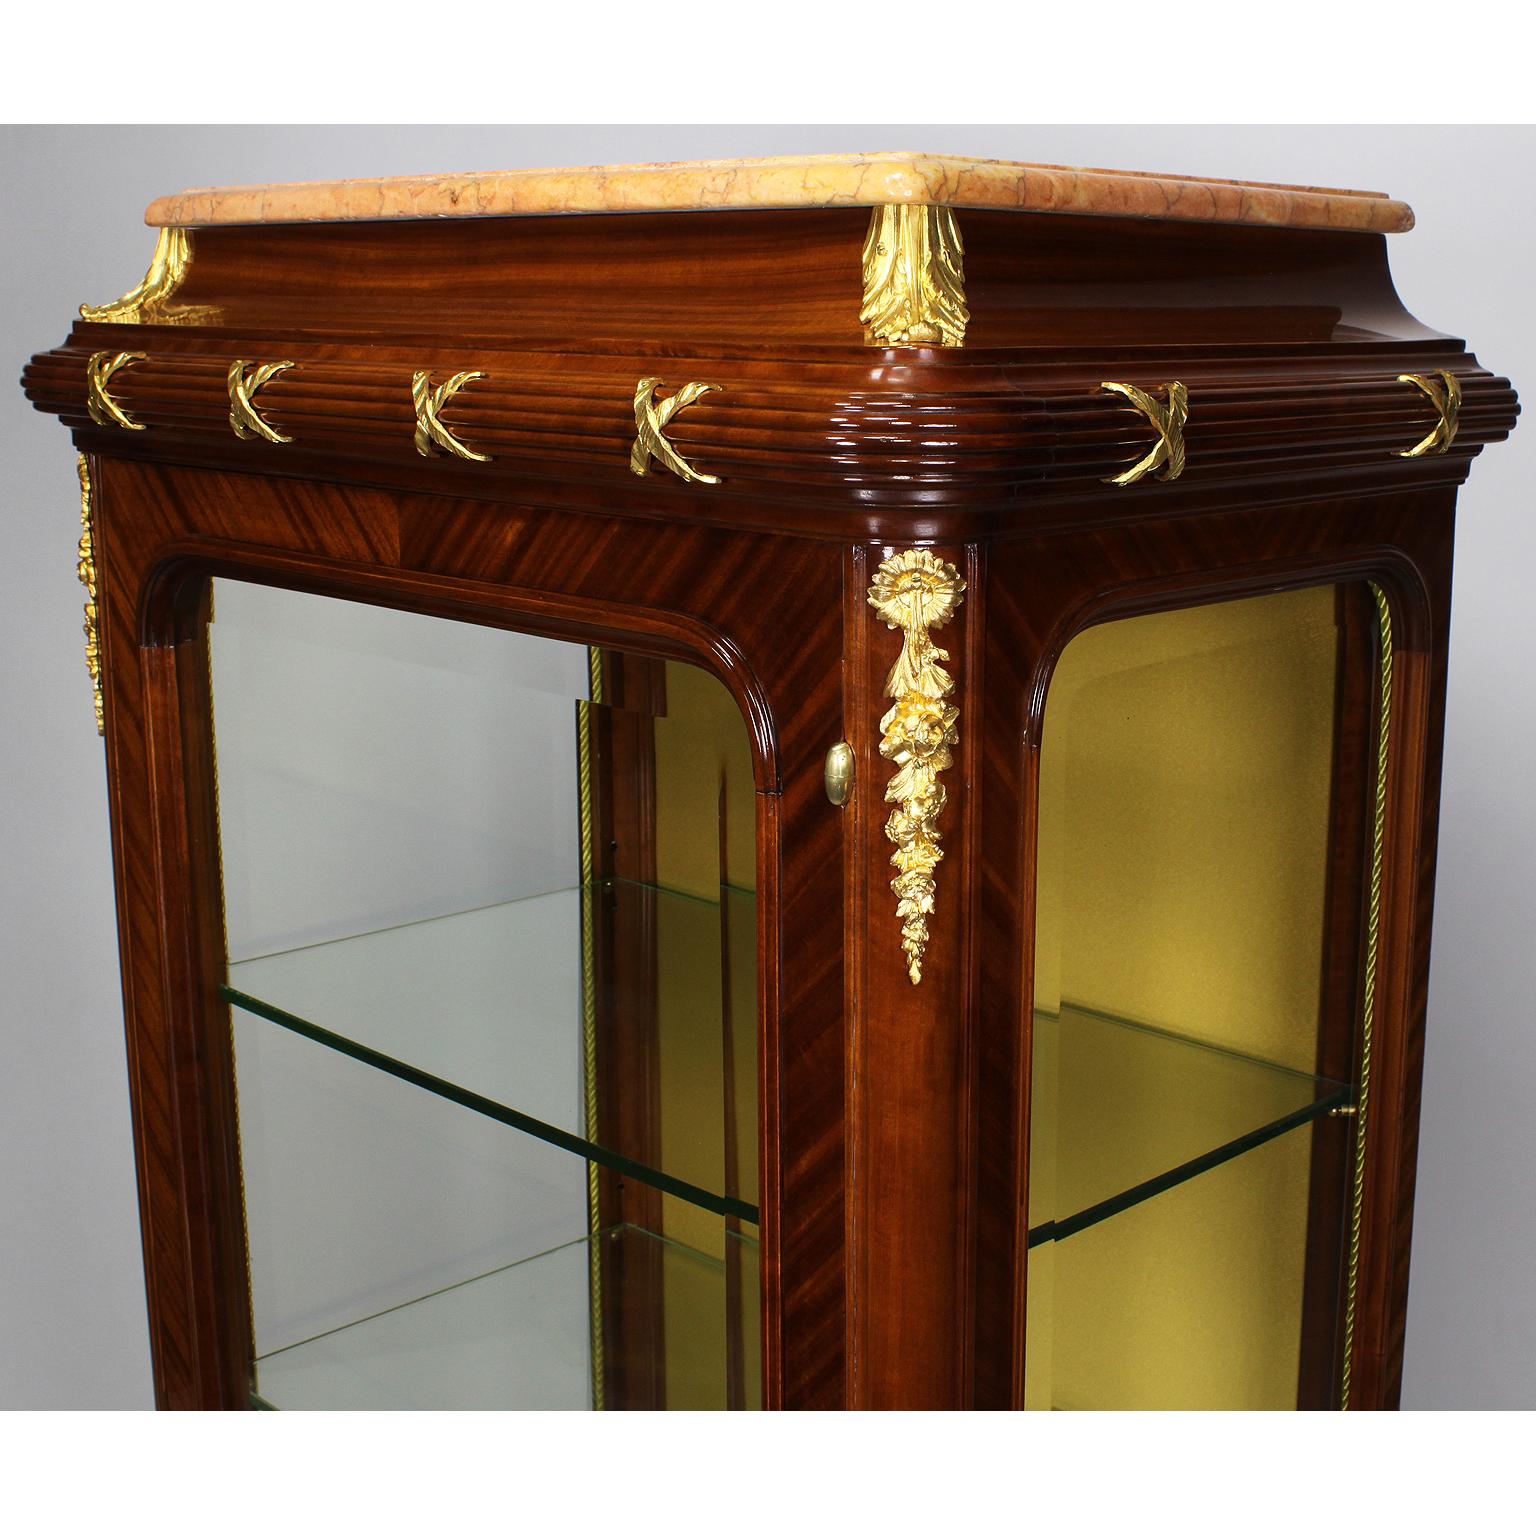 Early 20th Century Fine French 19th-20th Century Louis XV Style Ormolu-Mounted Tulipwood Vitrine For Sale